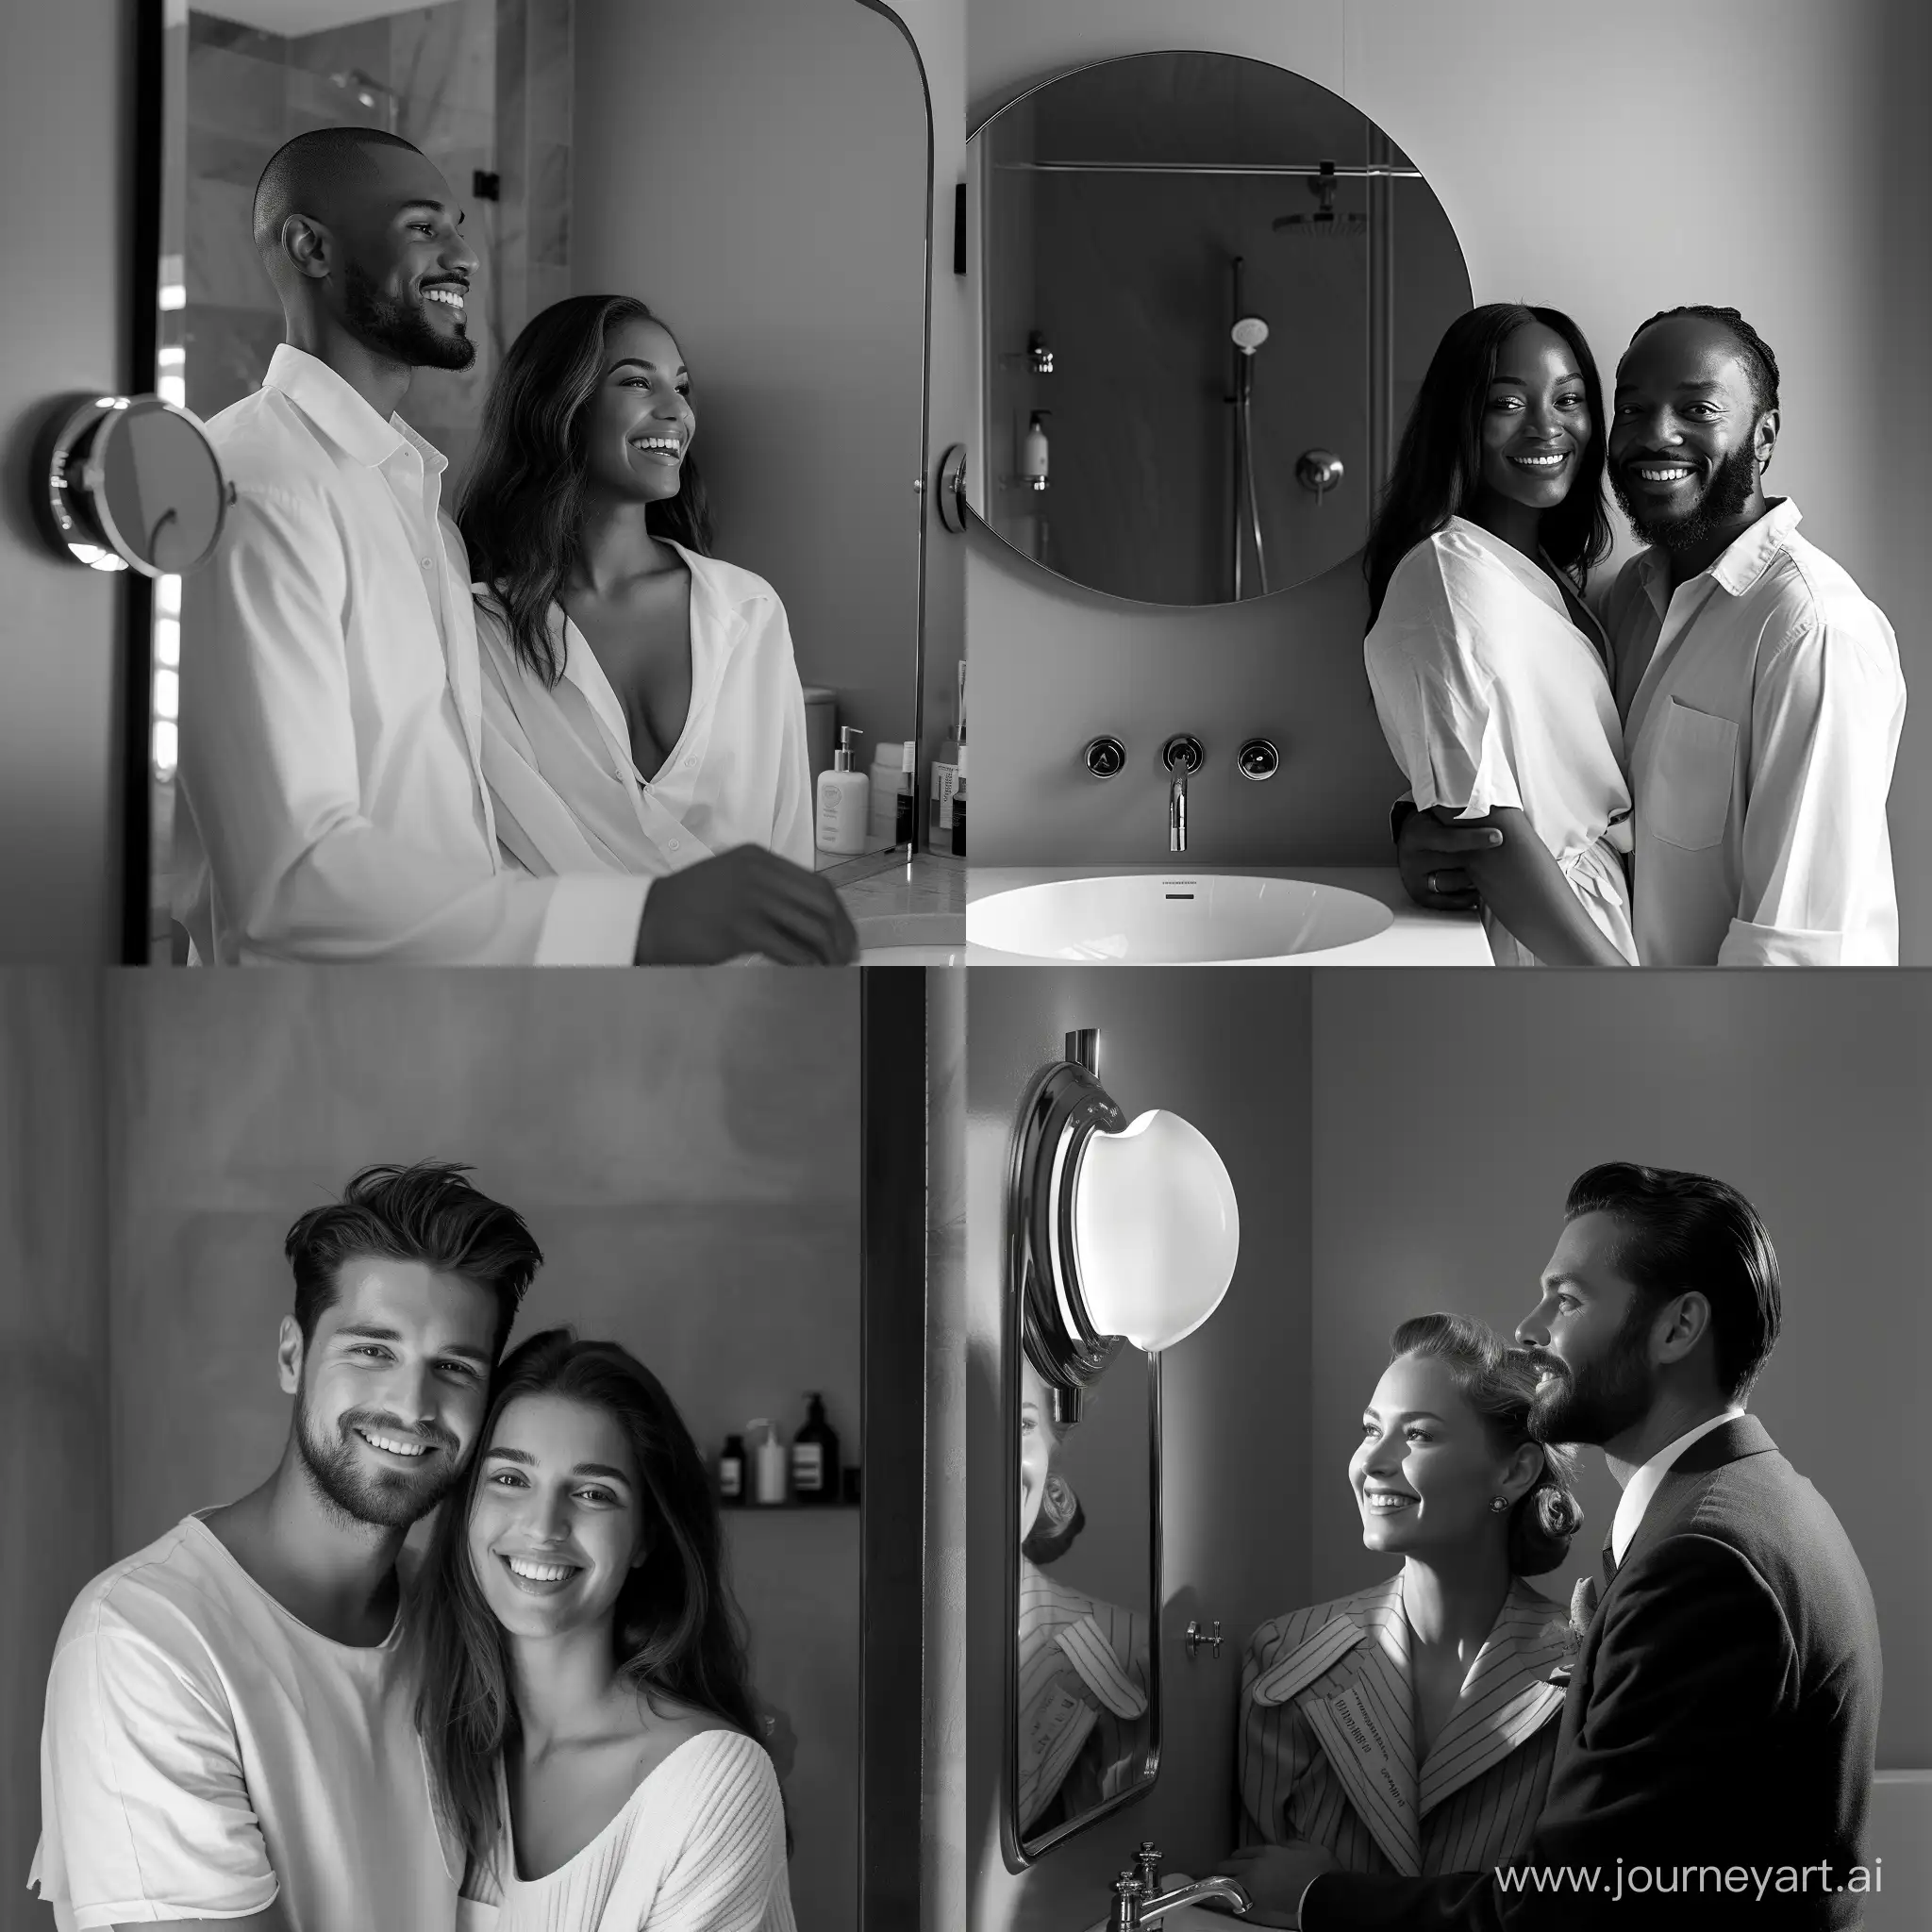 Couple-Smiling-in-Stylish-Black-and-White-Bathroom-Portrait